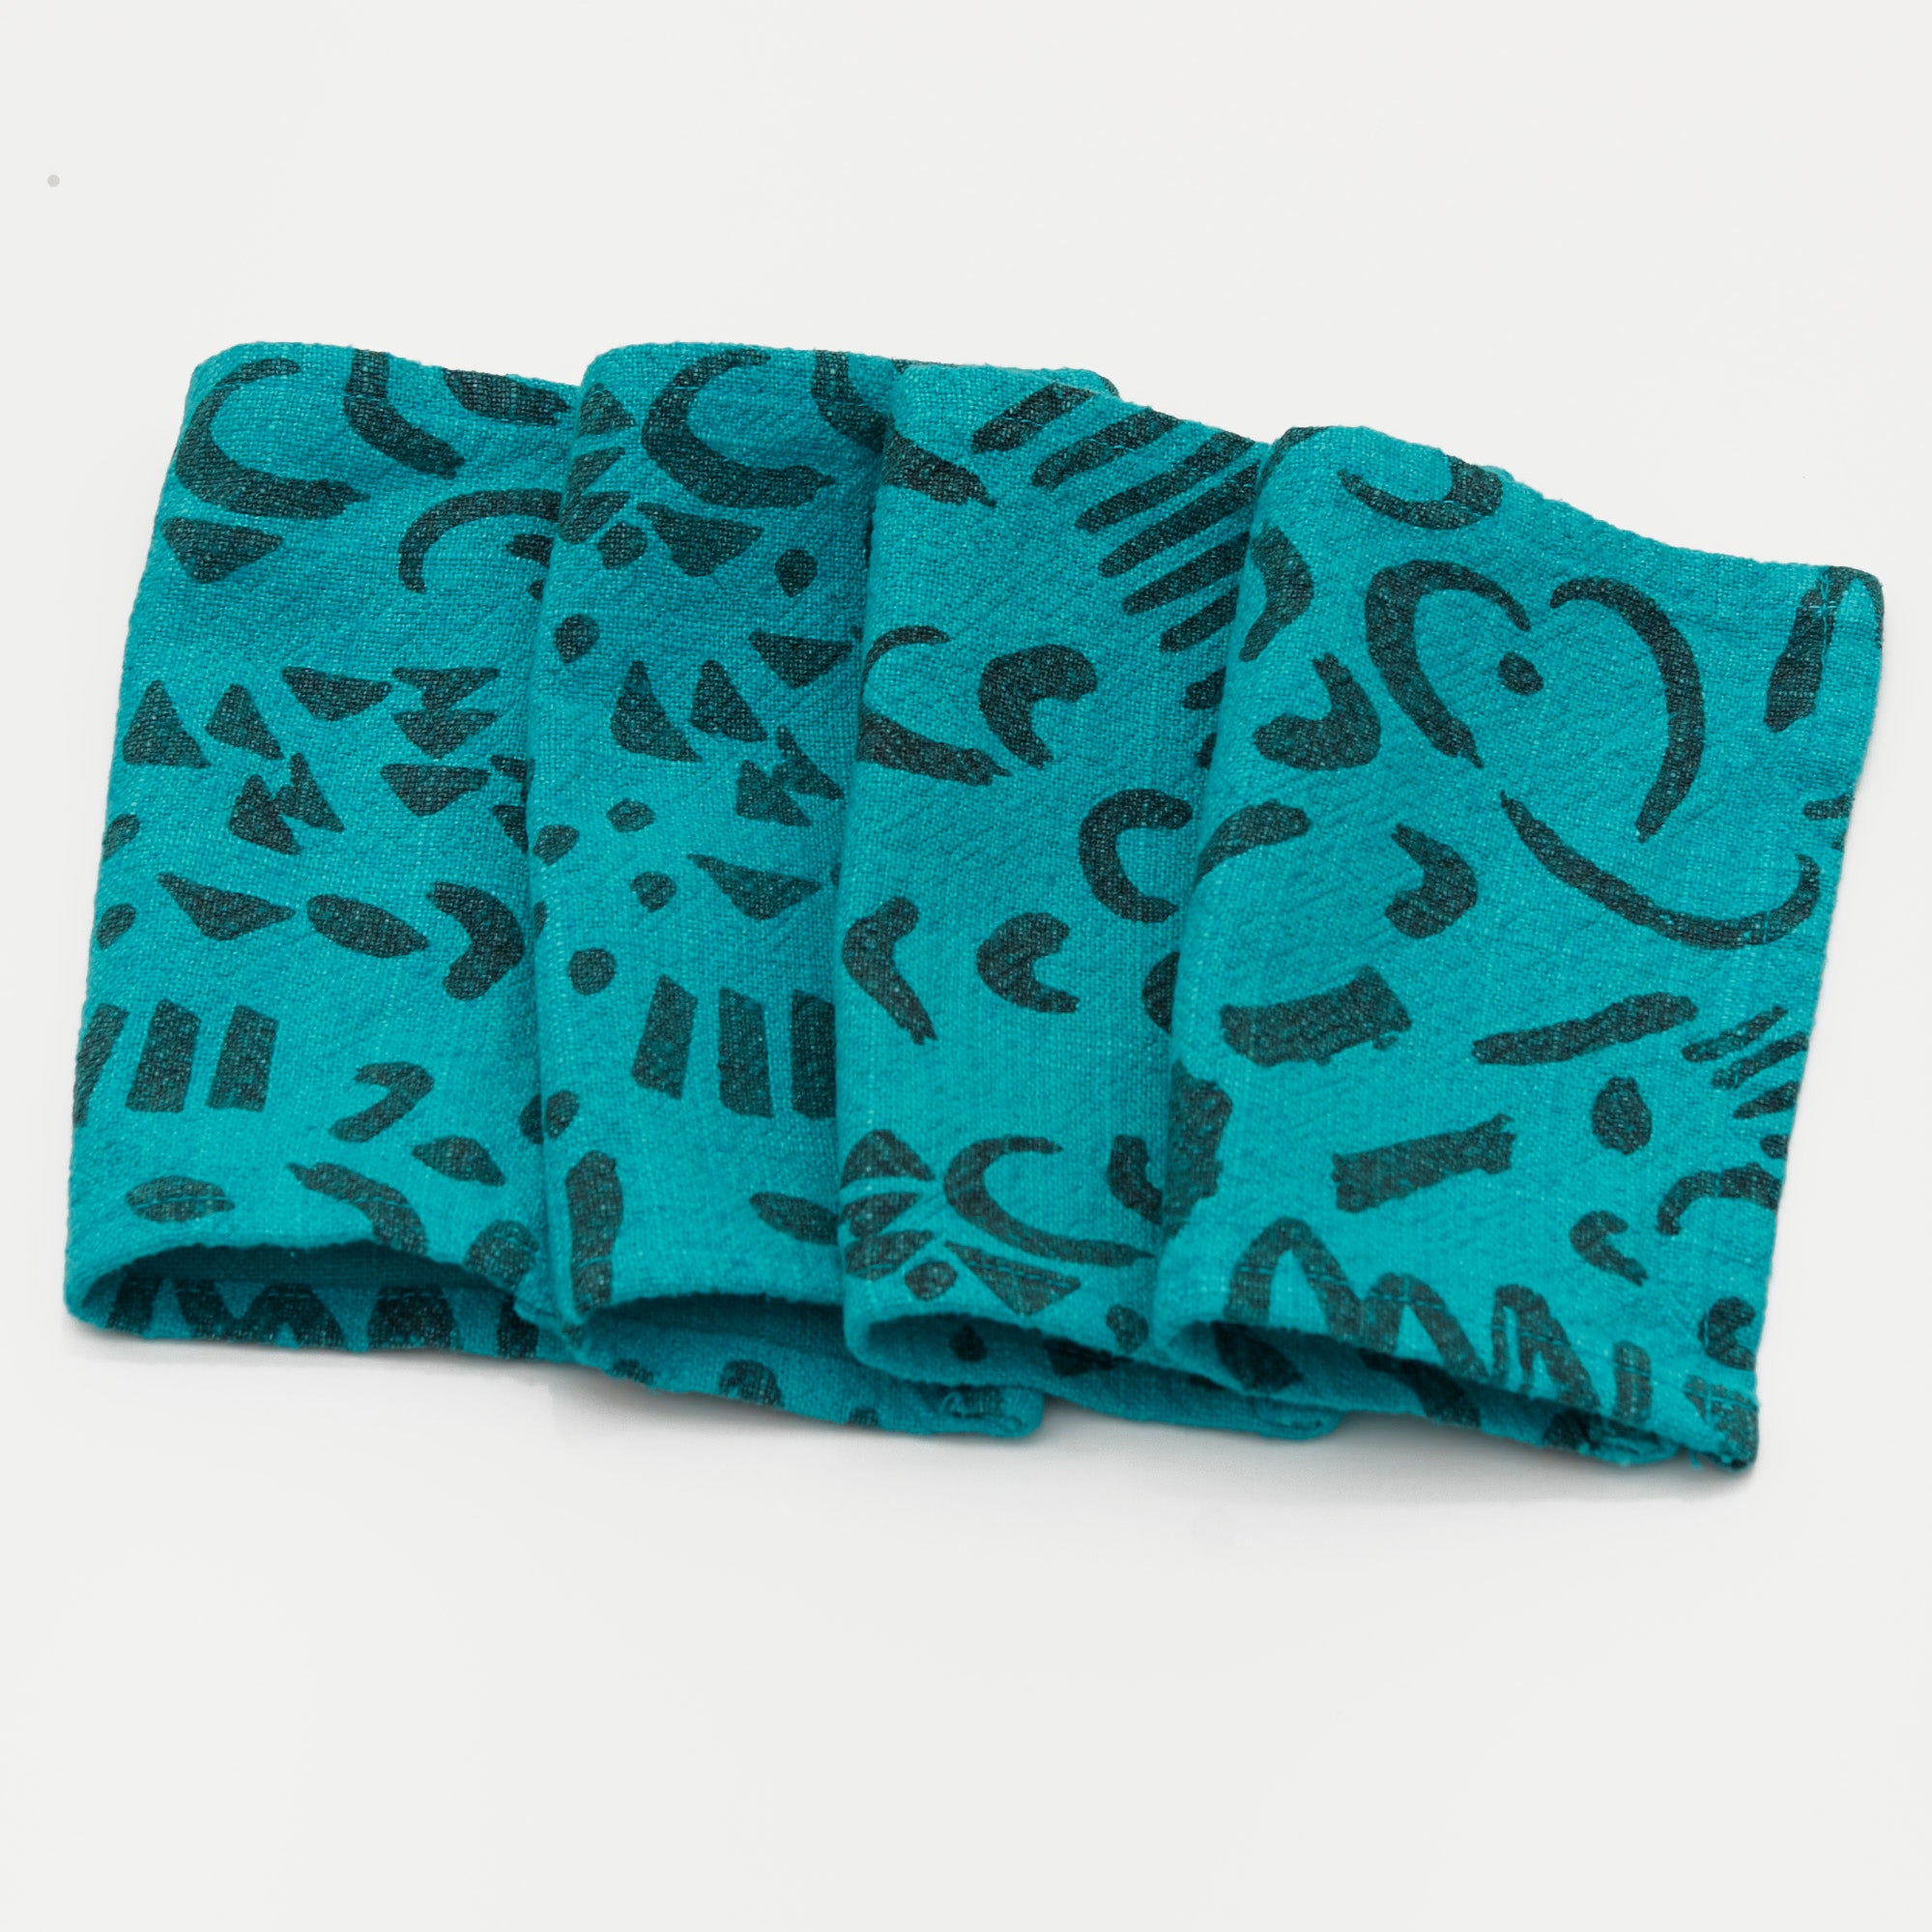 Little Napkins - Dashes & Moons - Charcoal - Turquoise